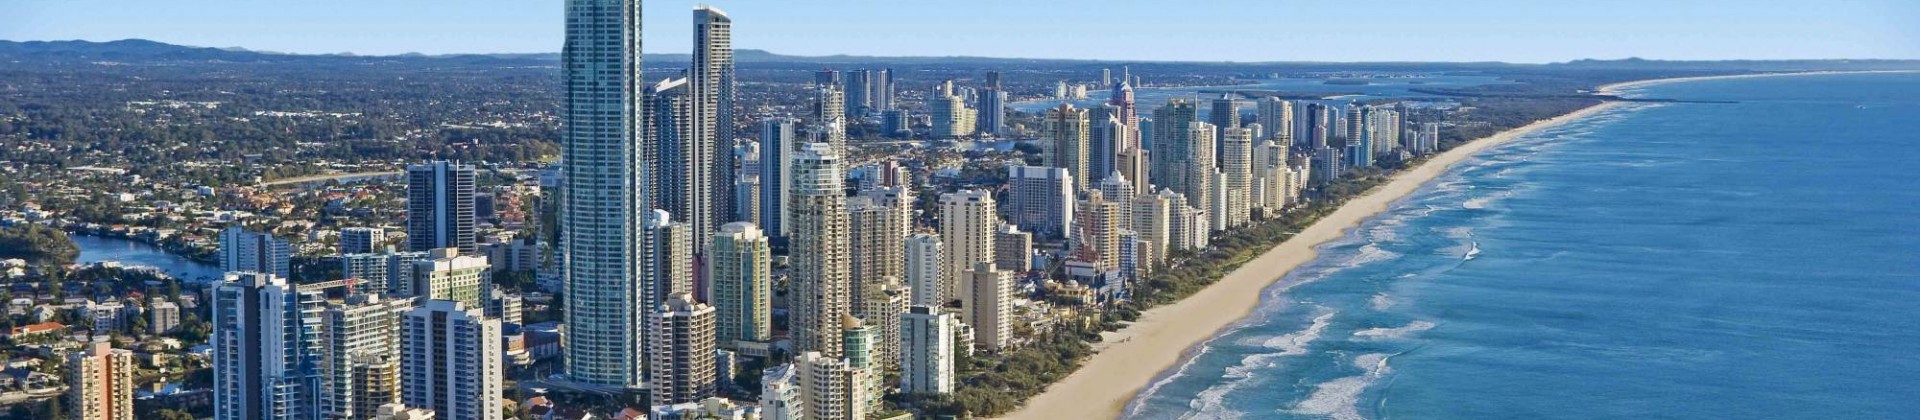 New Outdoor Event Space Announced for Broadbeach